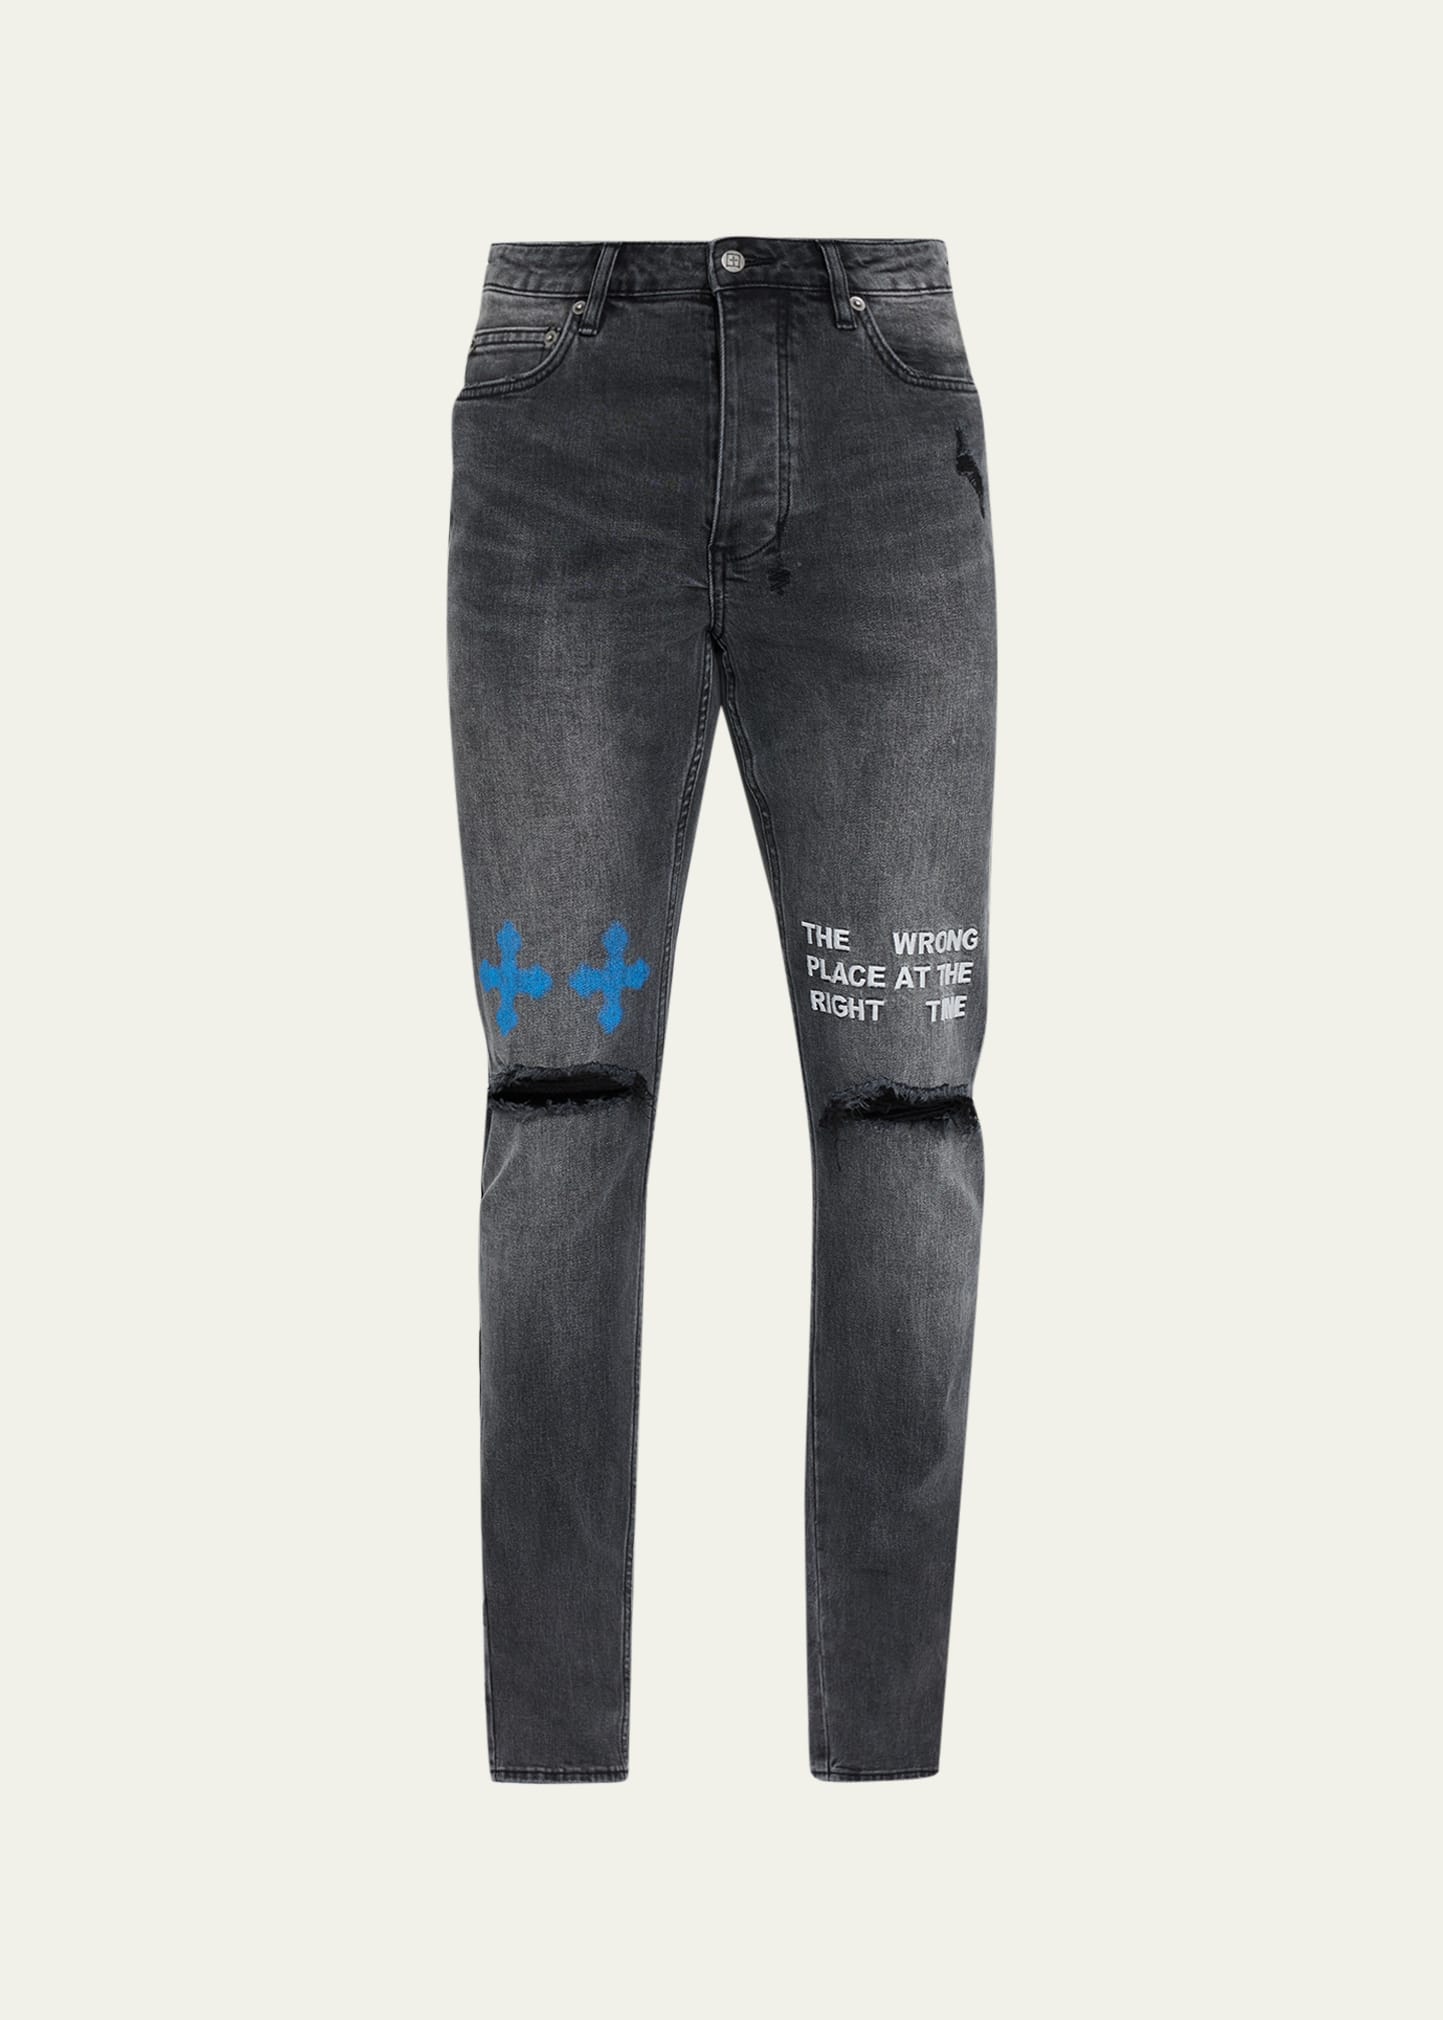 Men's Double Knee-Rip Washed Jeans